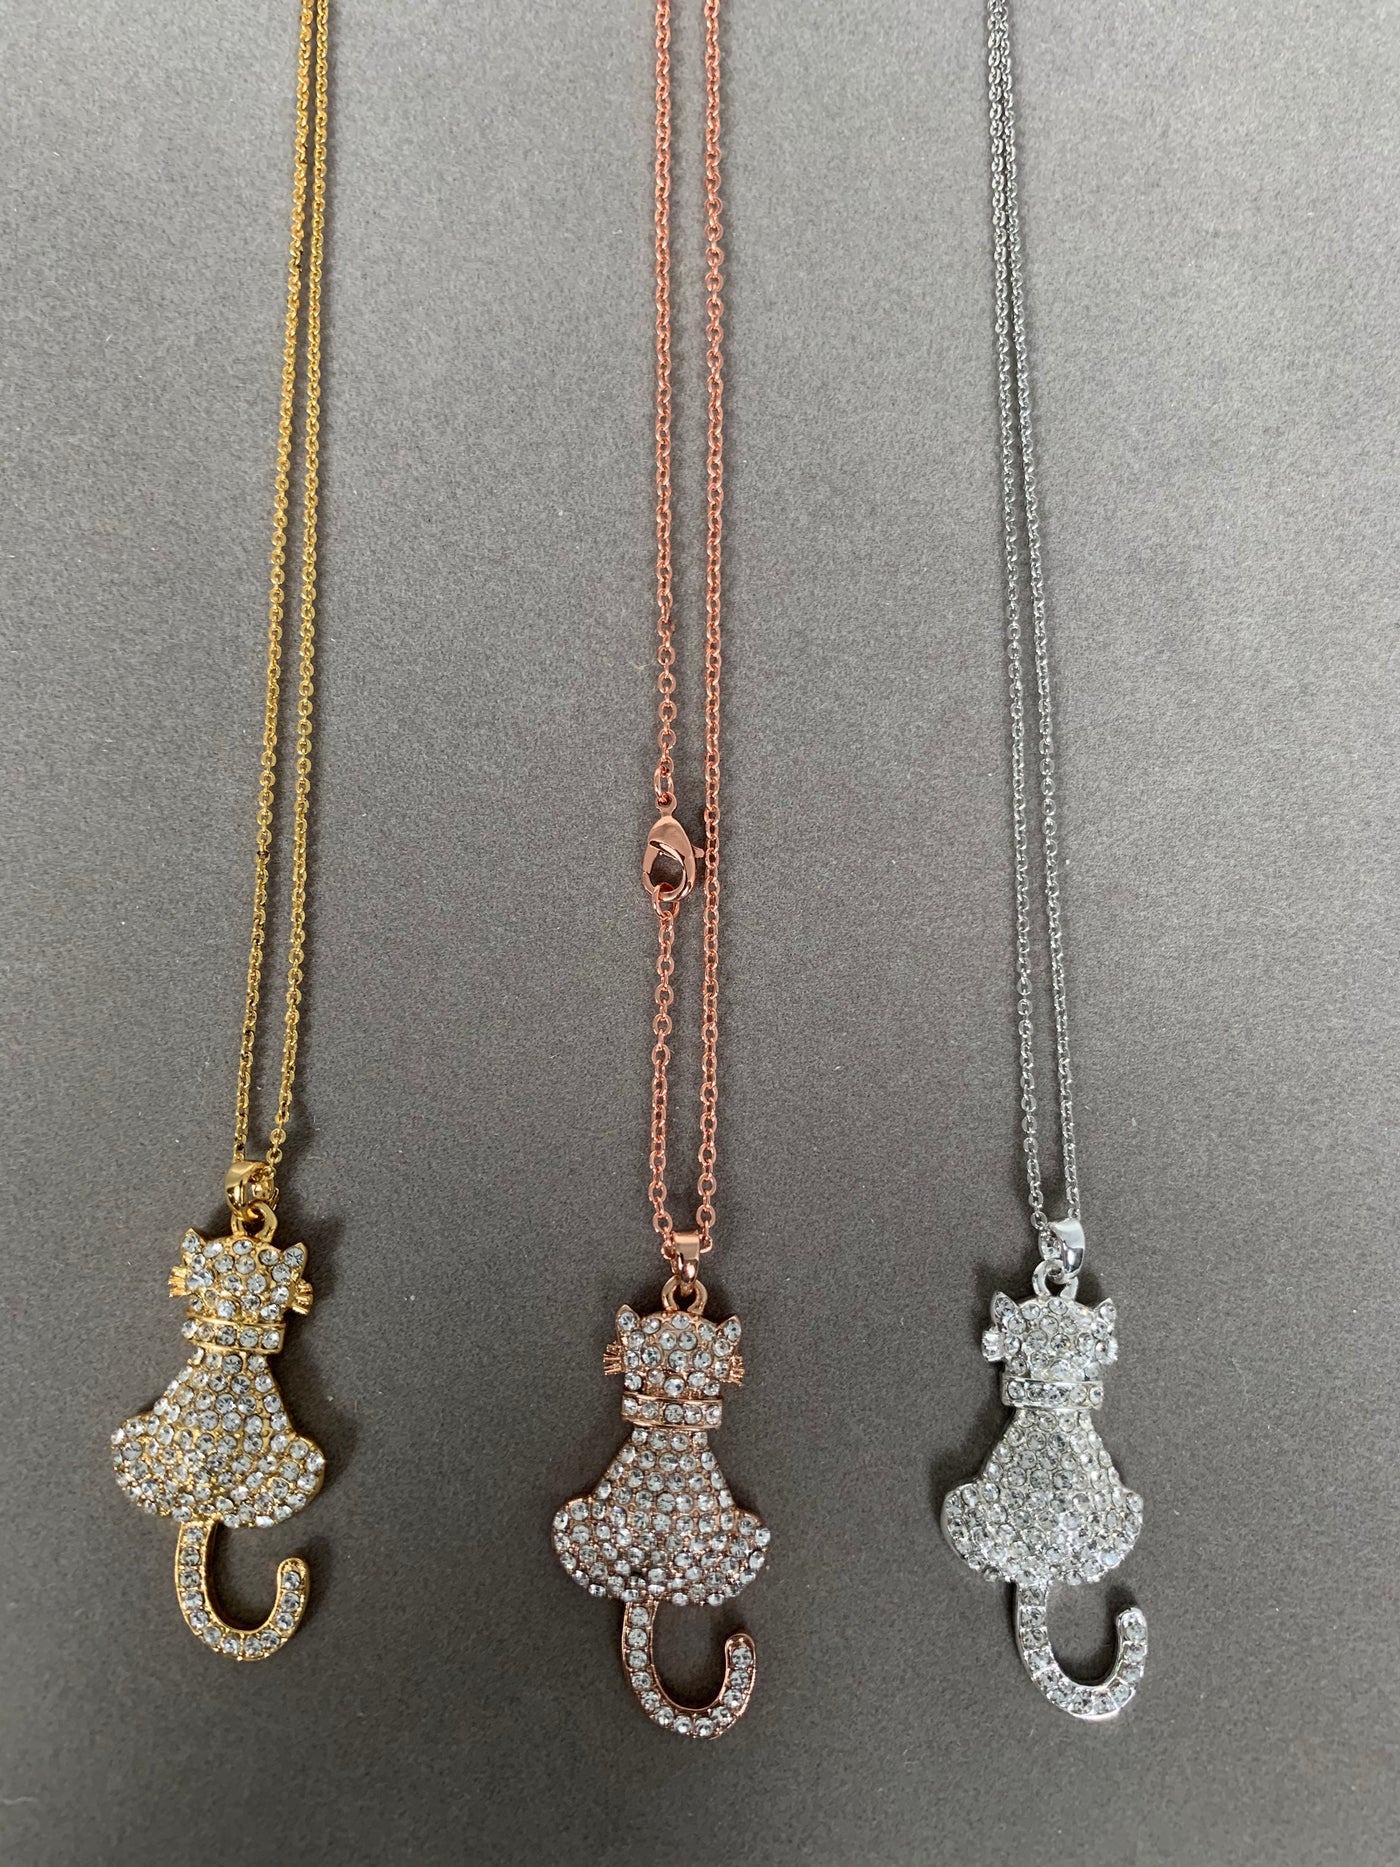 Rose Gold Tone Crystal Kitty Cat Pendant Necklace